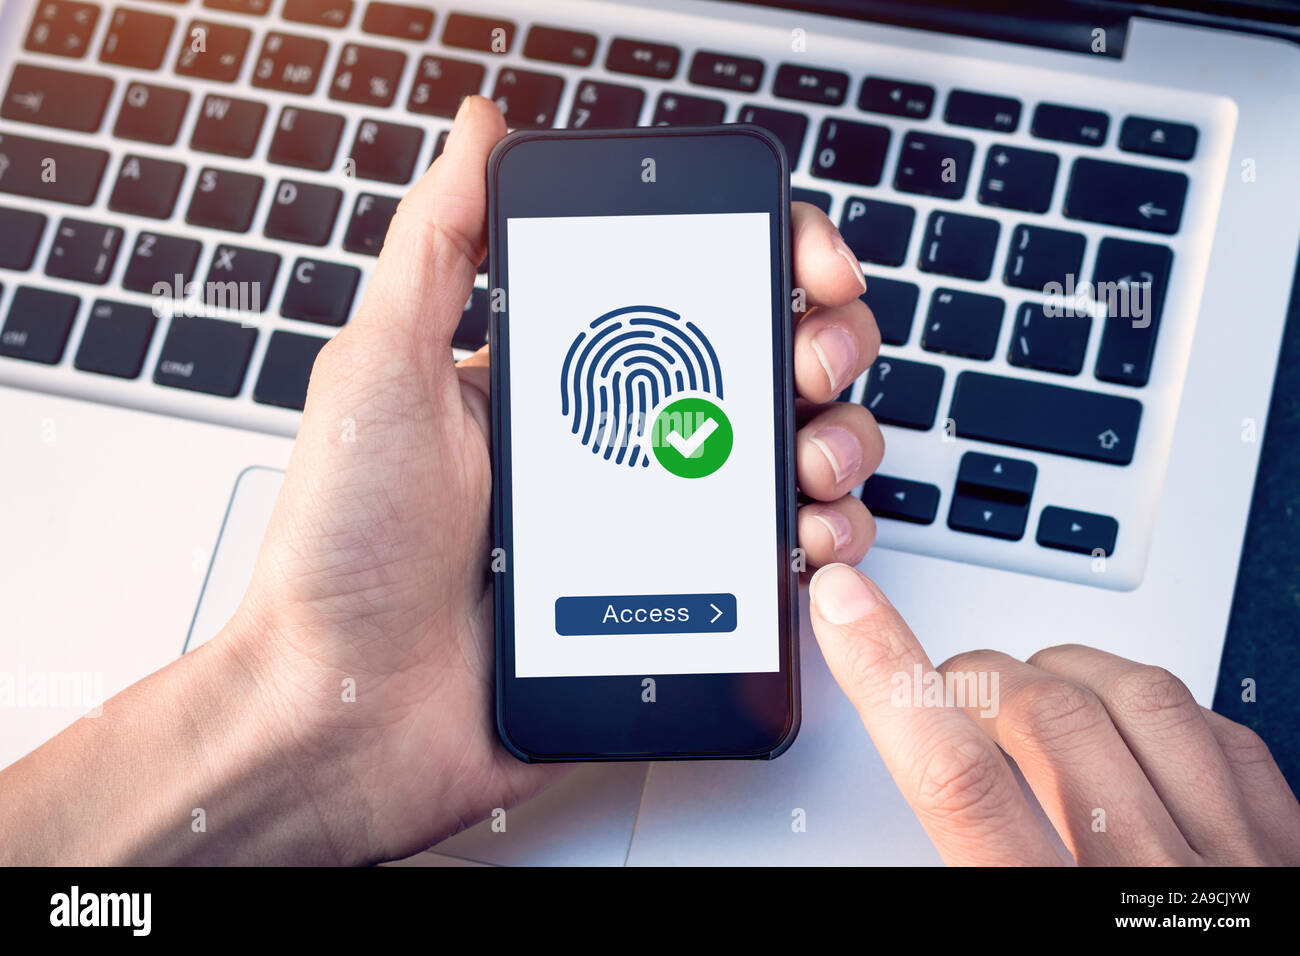 Secure access granted by valid fingerprint scan, cyber security on internet with biometrics authentication technology on mobile phone screen, person h Stock Photo